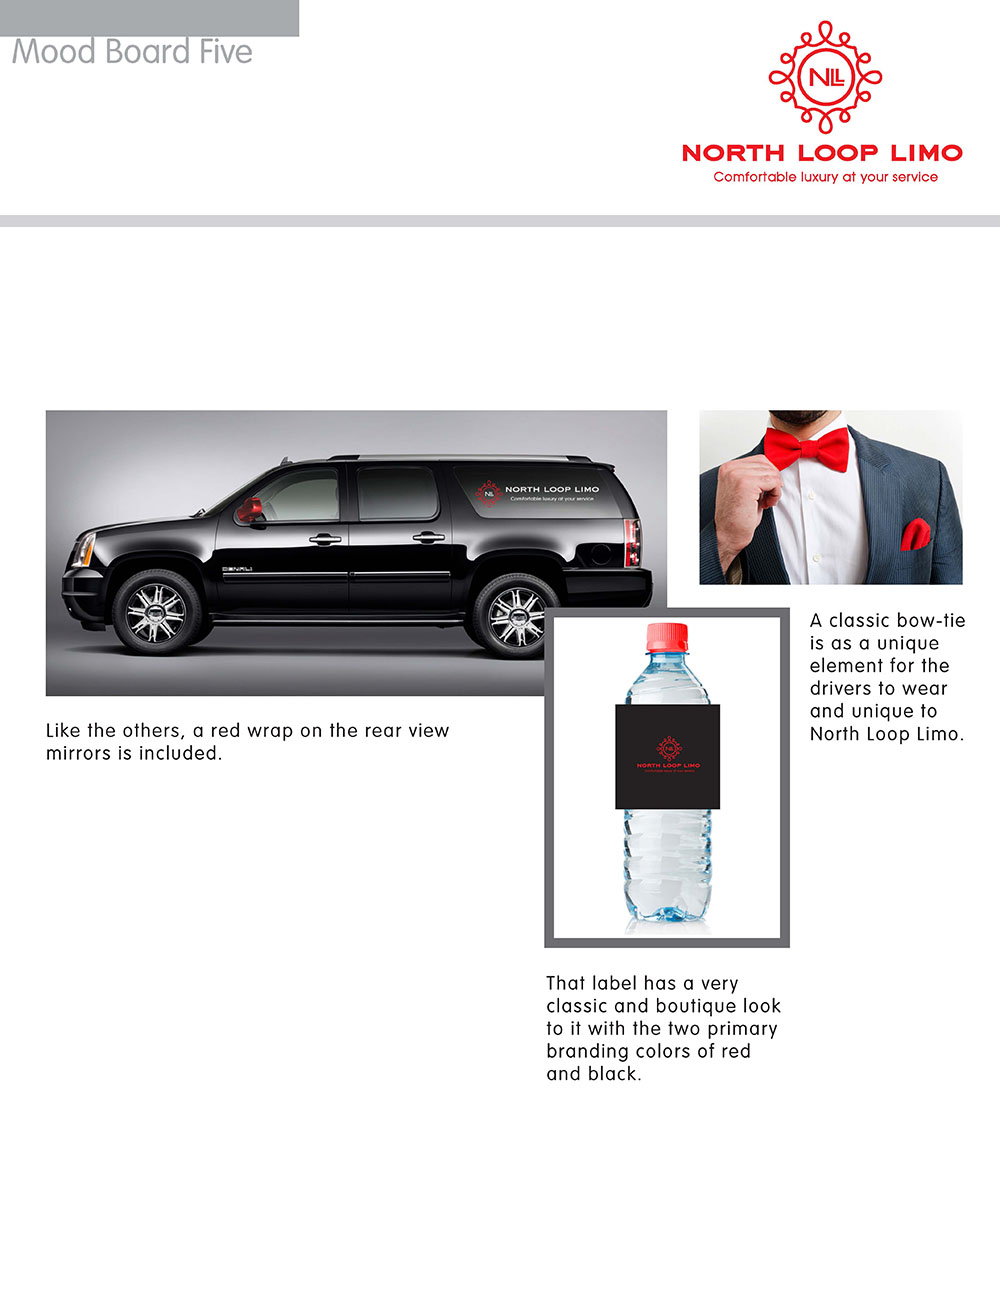 North Loop Limo Branding and Mood Boards